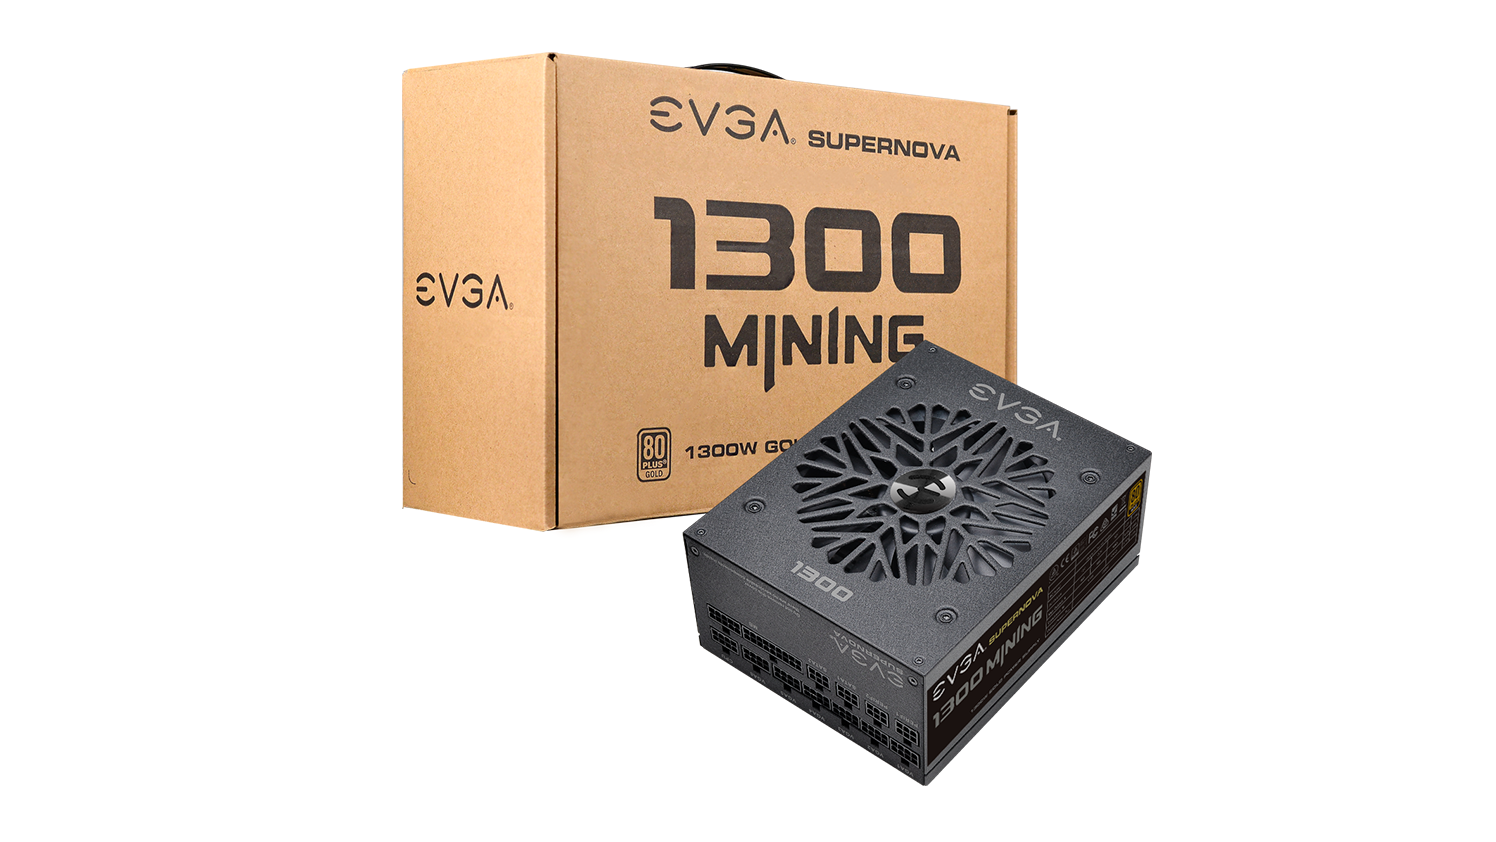 evga’s-6-gpu-psu-for-mining-will-fuel-your-hate-for-crypto